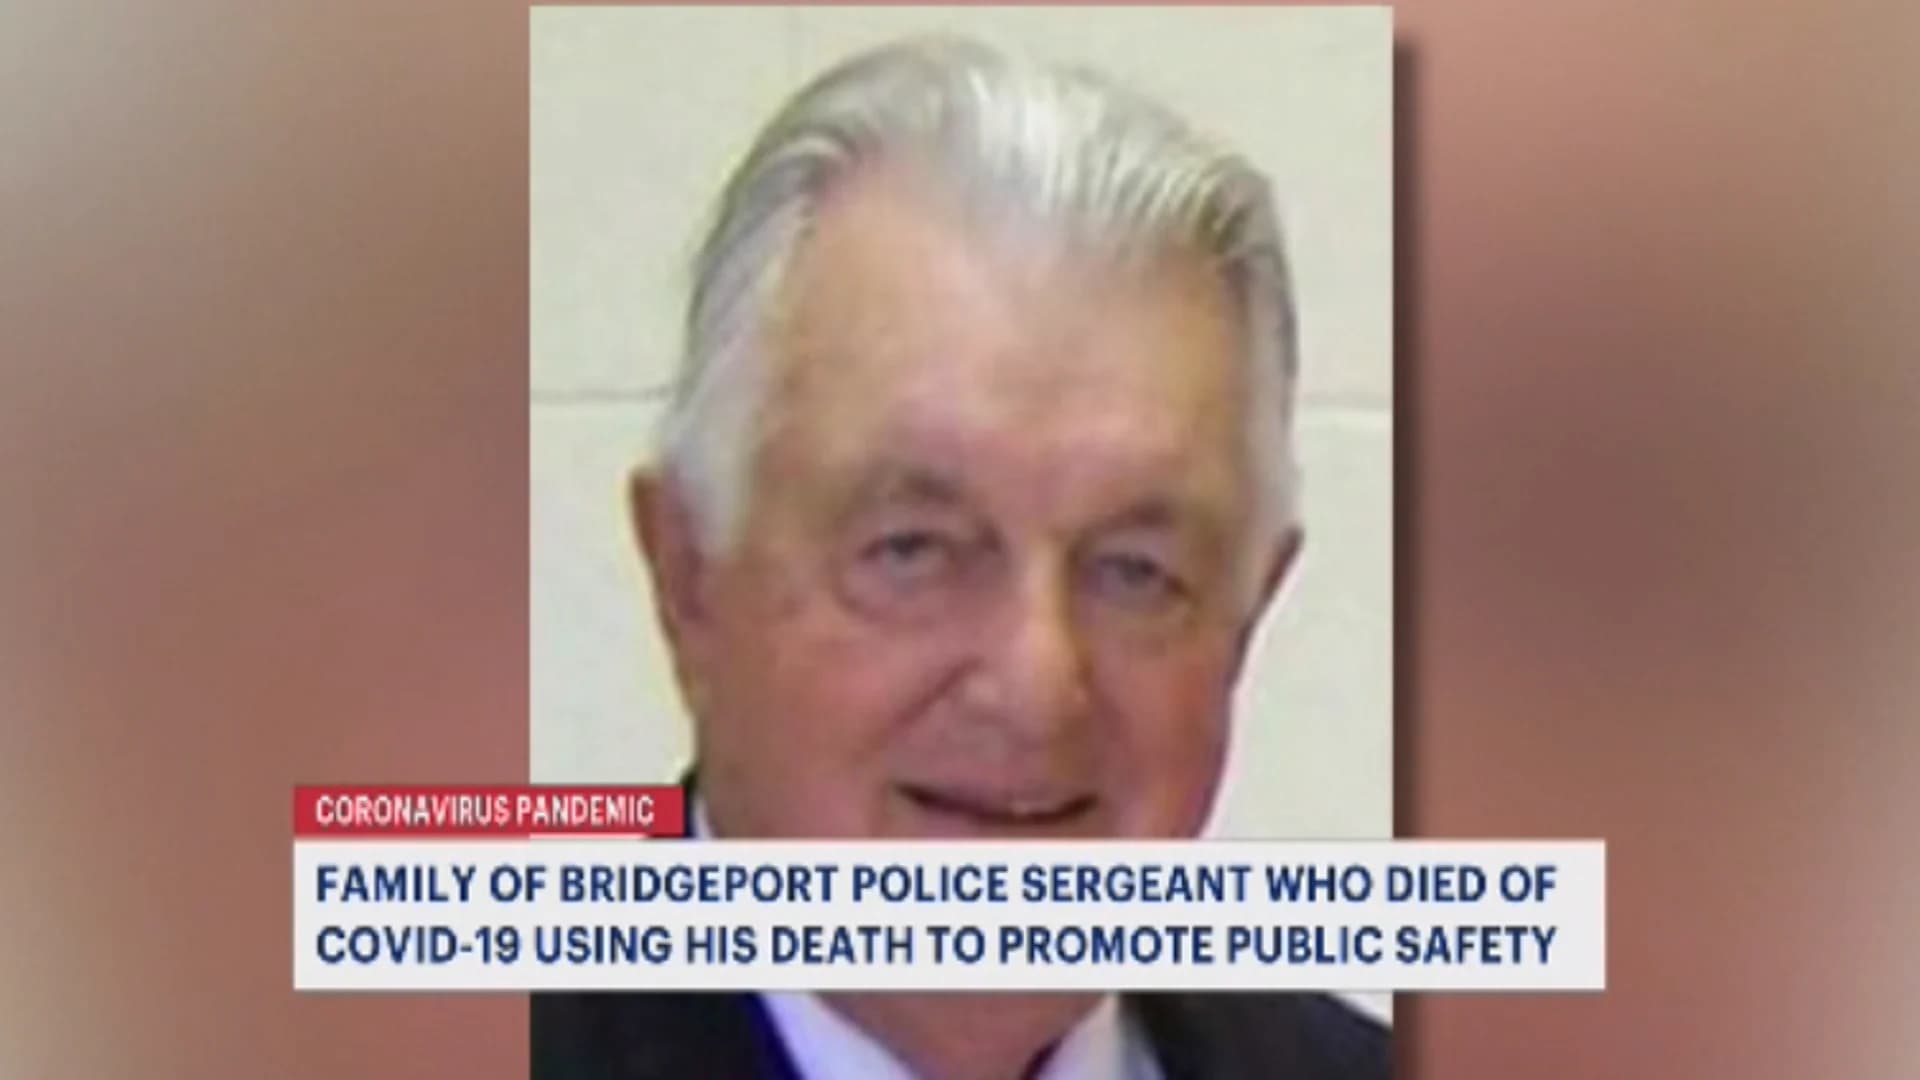 Family of Bridgeport police sergeant who died of COVID-19 uses his death to promote public safety